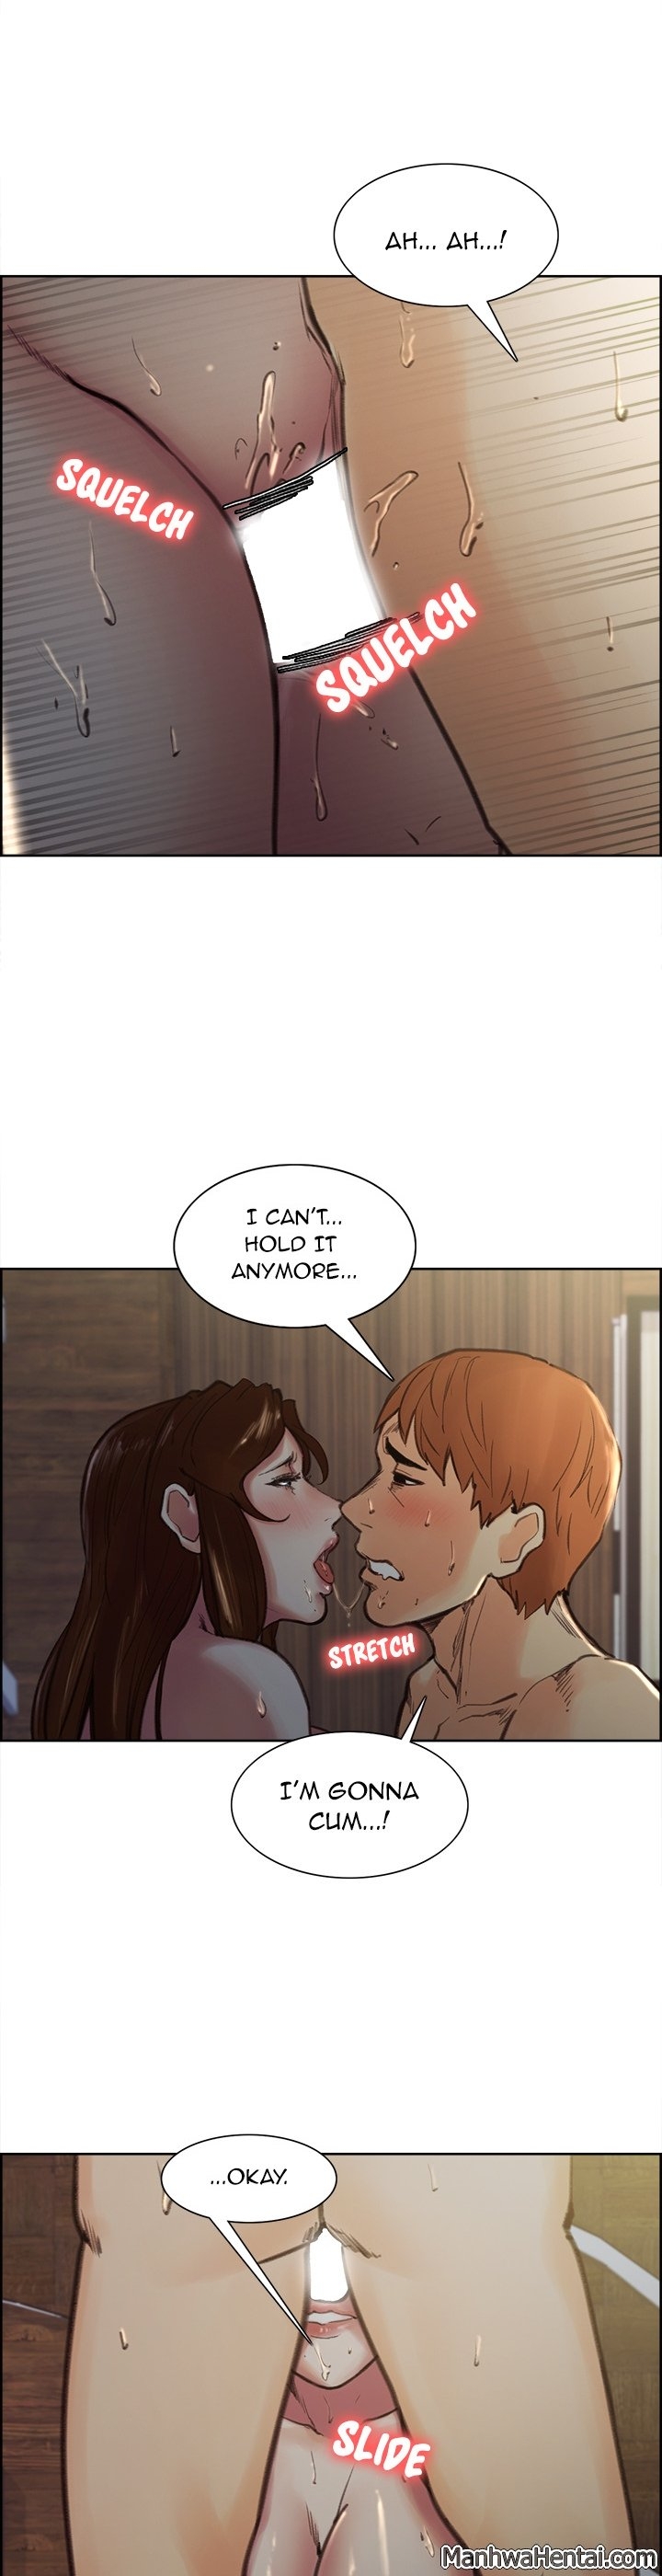 [Serious] The Sharehouse Ch. 1-11 [English] 226